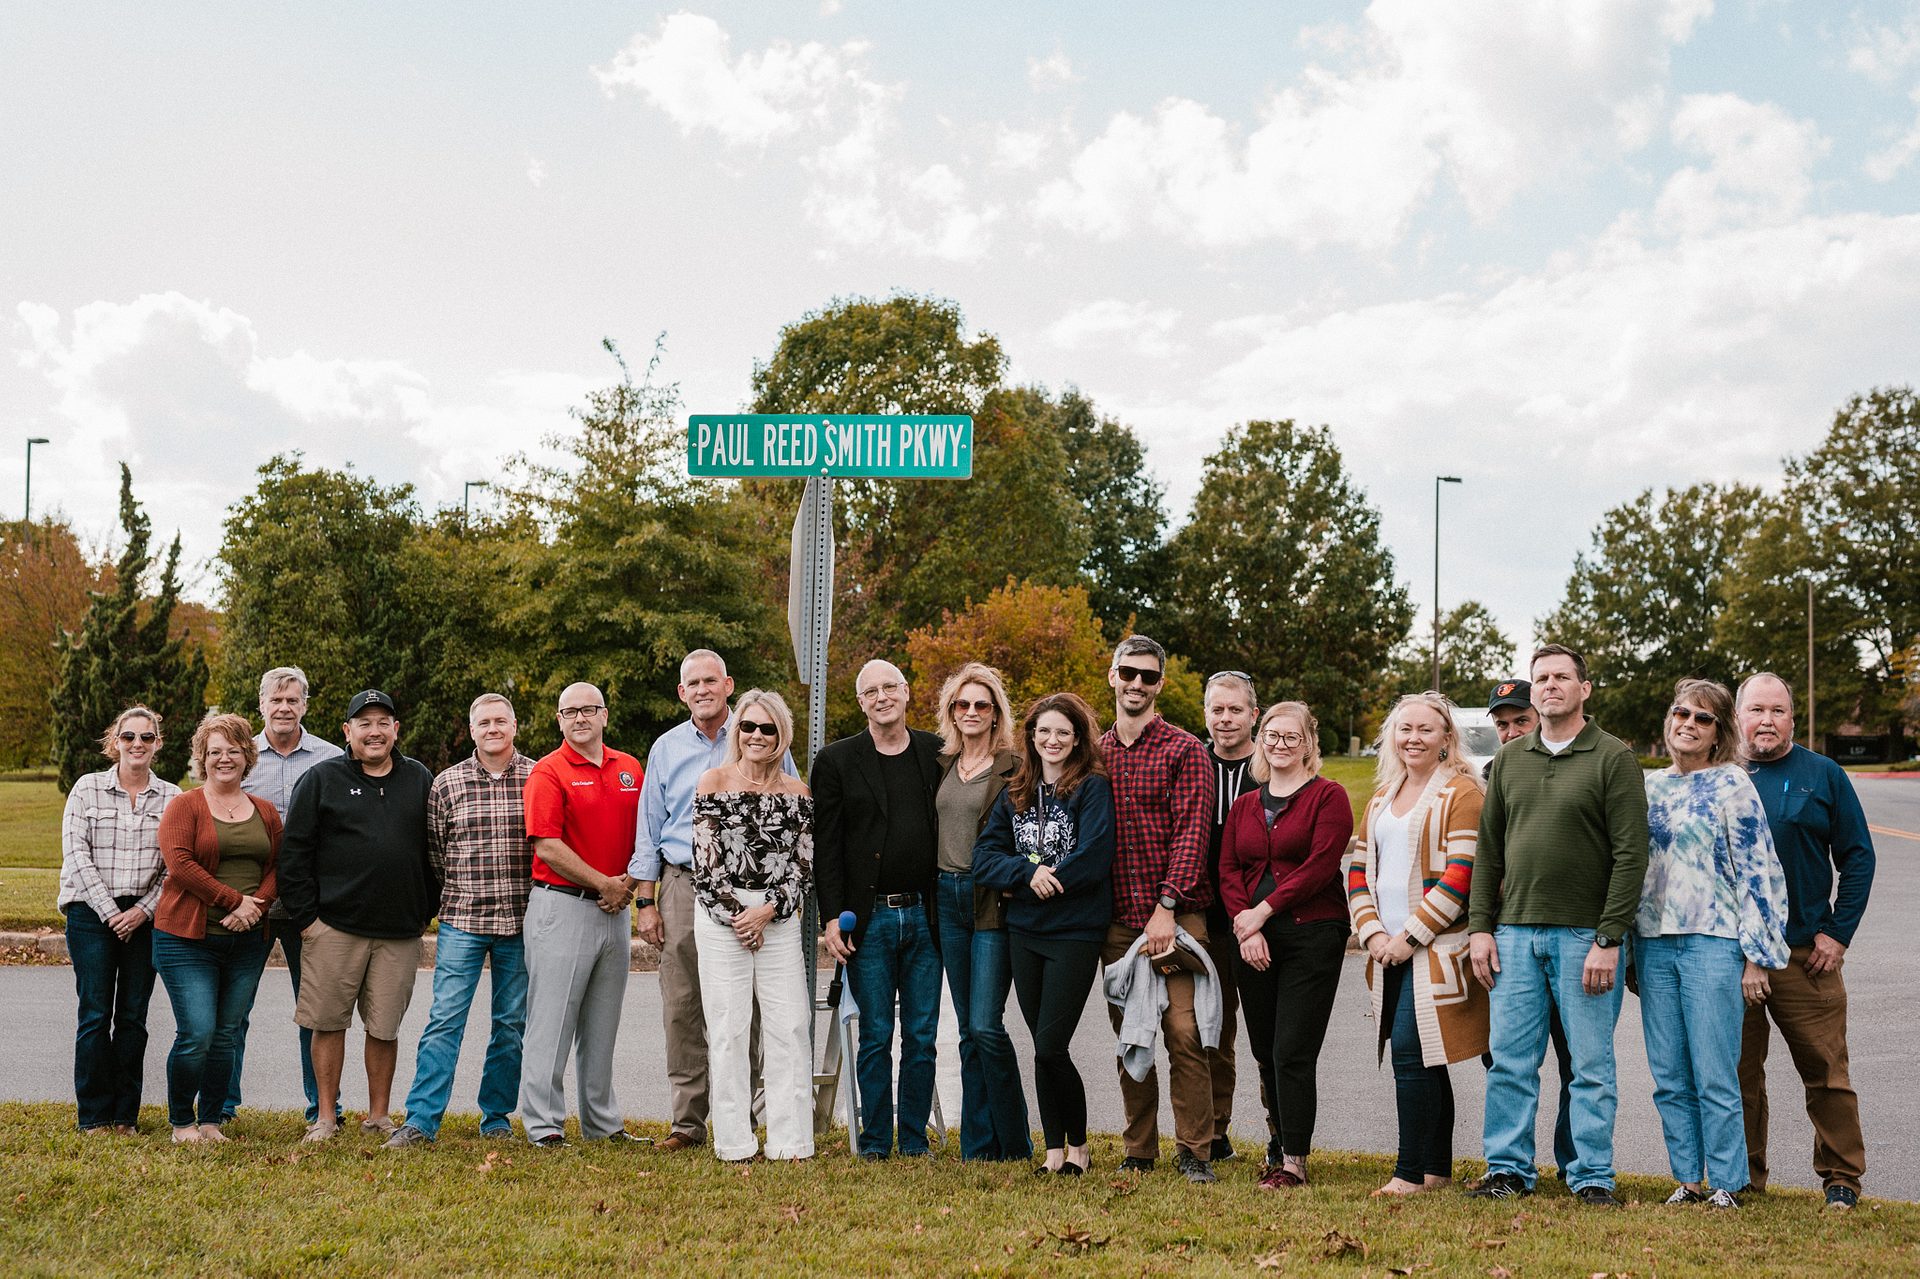 Paul Reed Smith Honored with Road Naming Ceremony: "Paul Reed Smith Parkway"